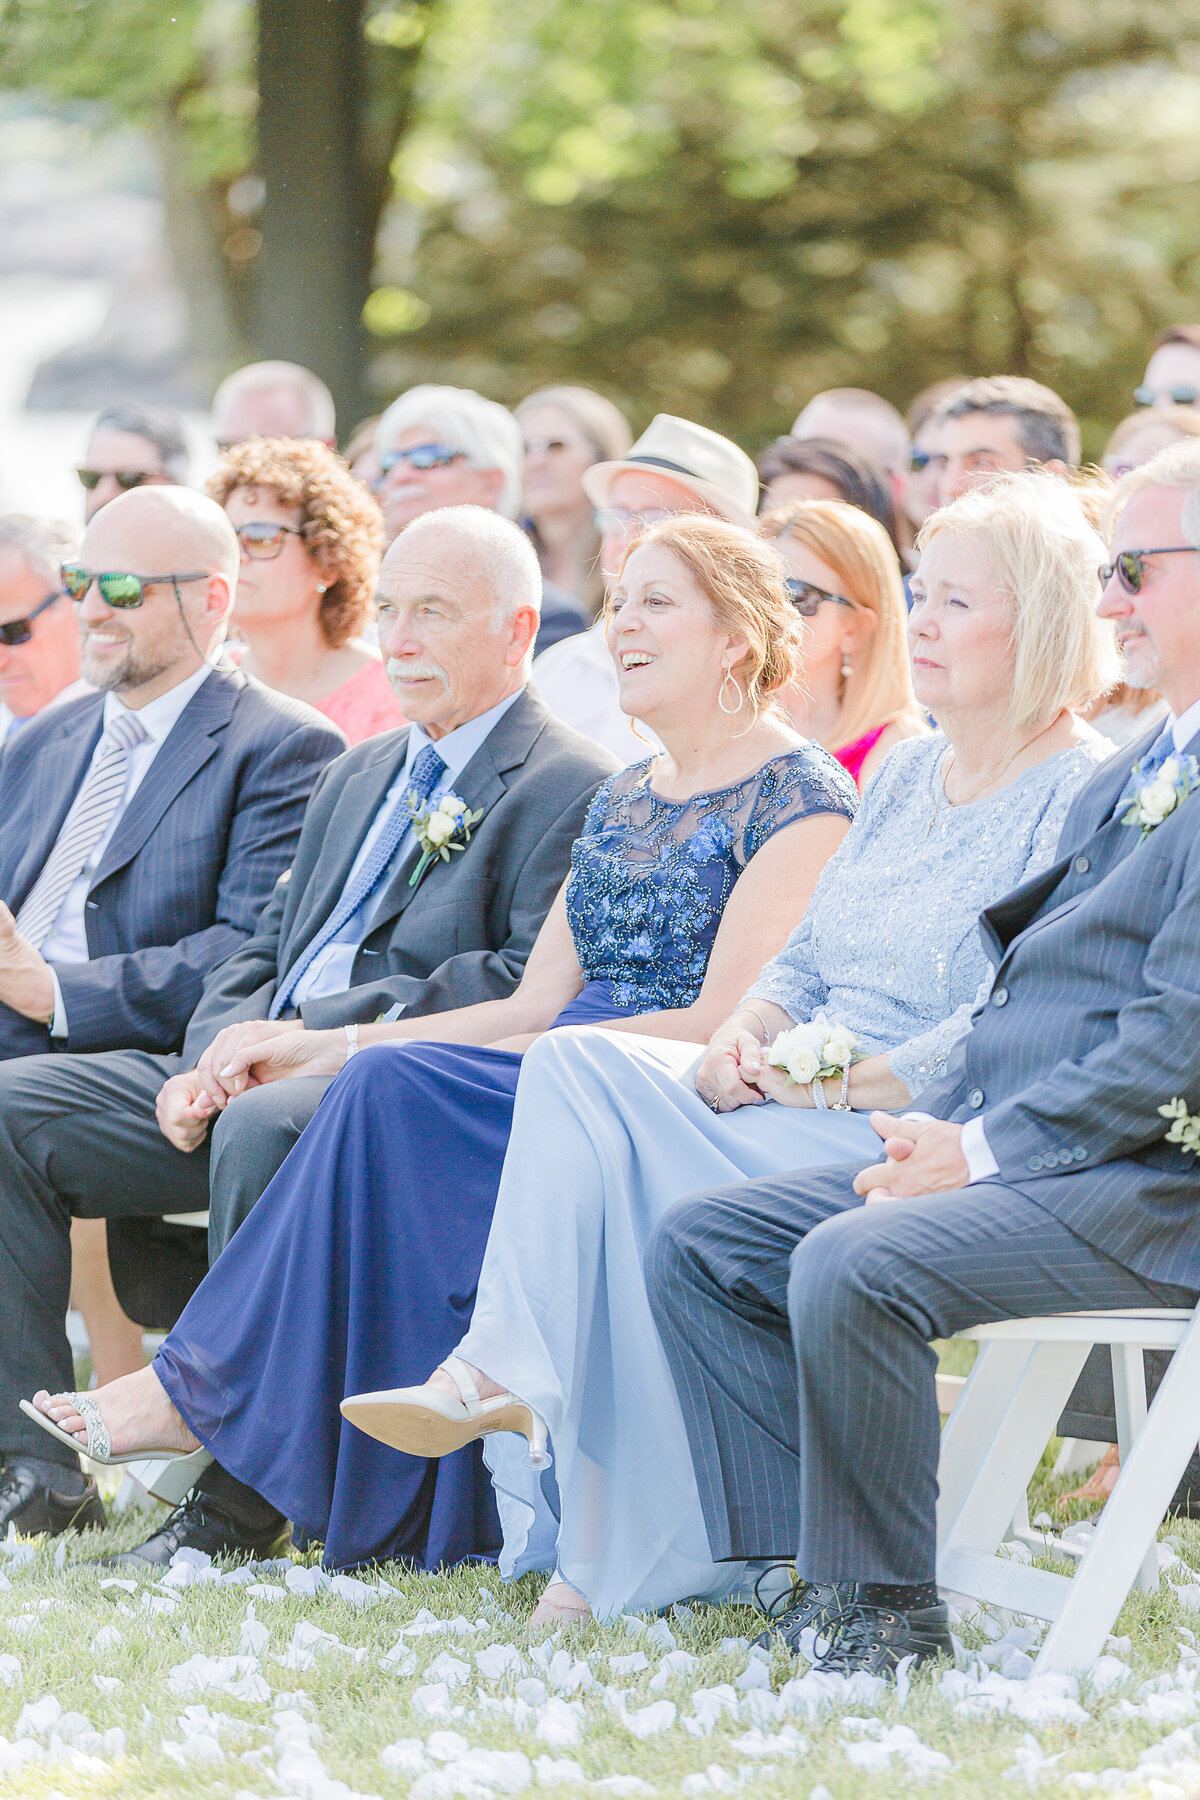 Lia Rose Weddings captures a candid image of guest laughing at a wedding ceremony.